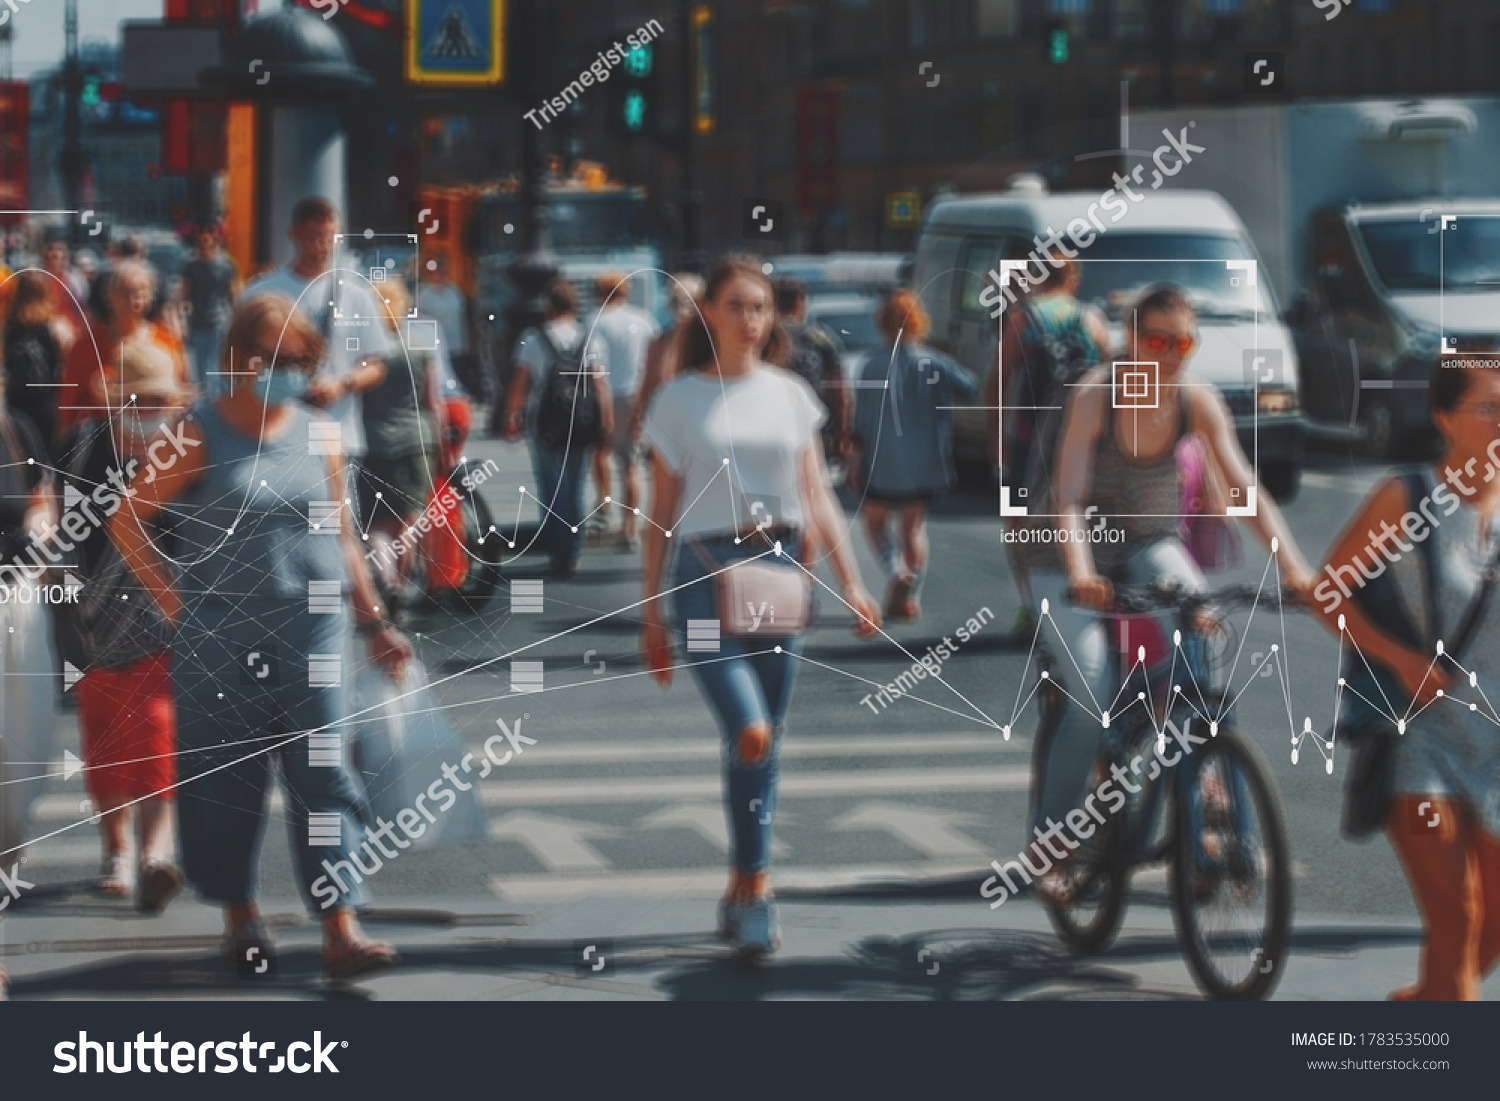 Face recognition and personal identification technologies in street surveillance cameras, law enforcement control. crowd of passers-by with graphic elements. Privacy and personal data protection, #1783535000